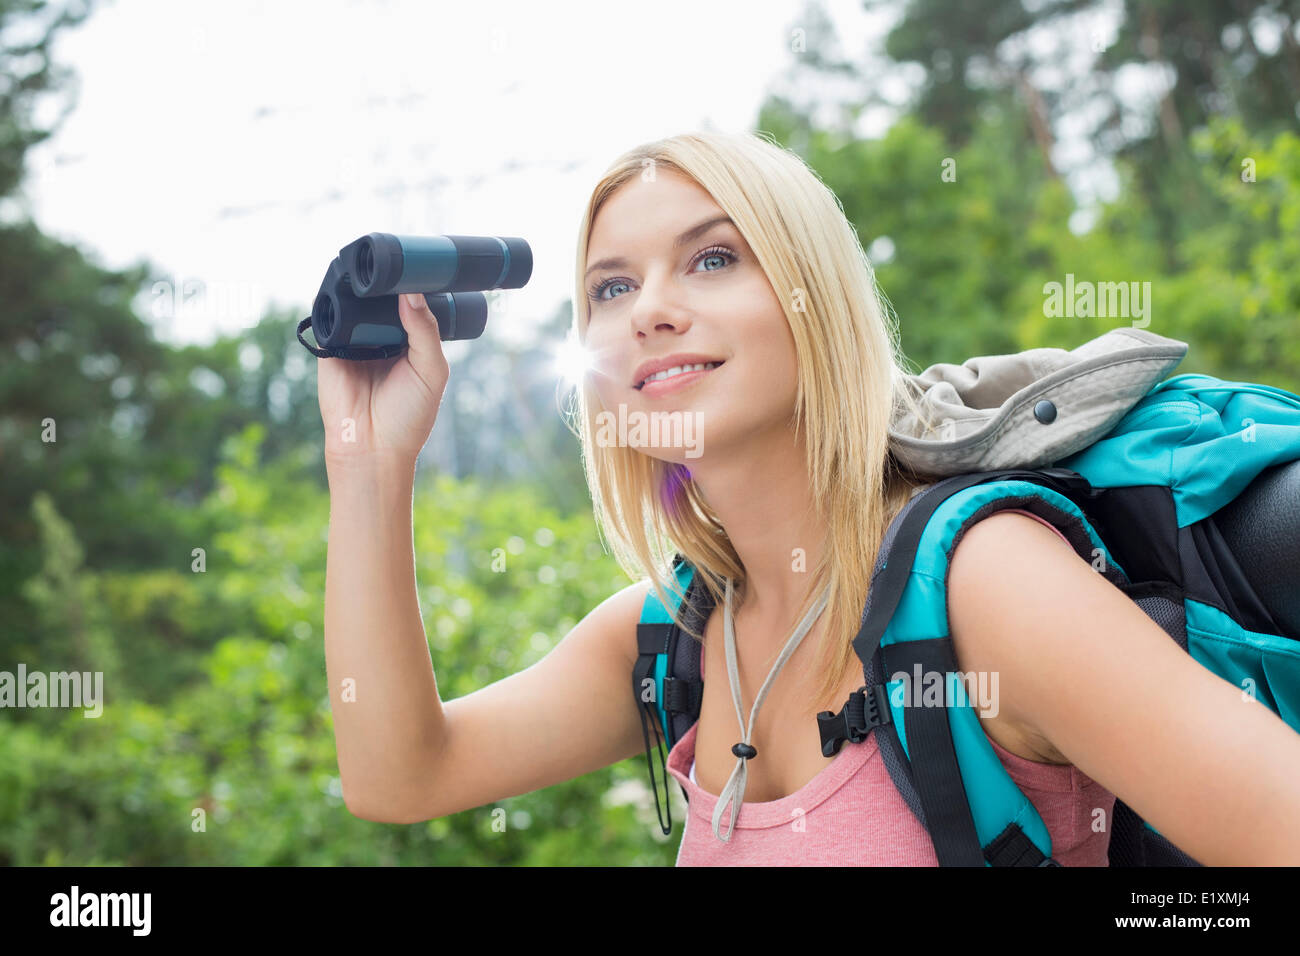 Young female hiker using binoculars in forest Stock Photo